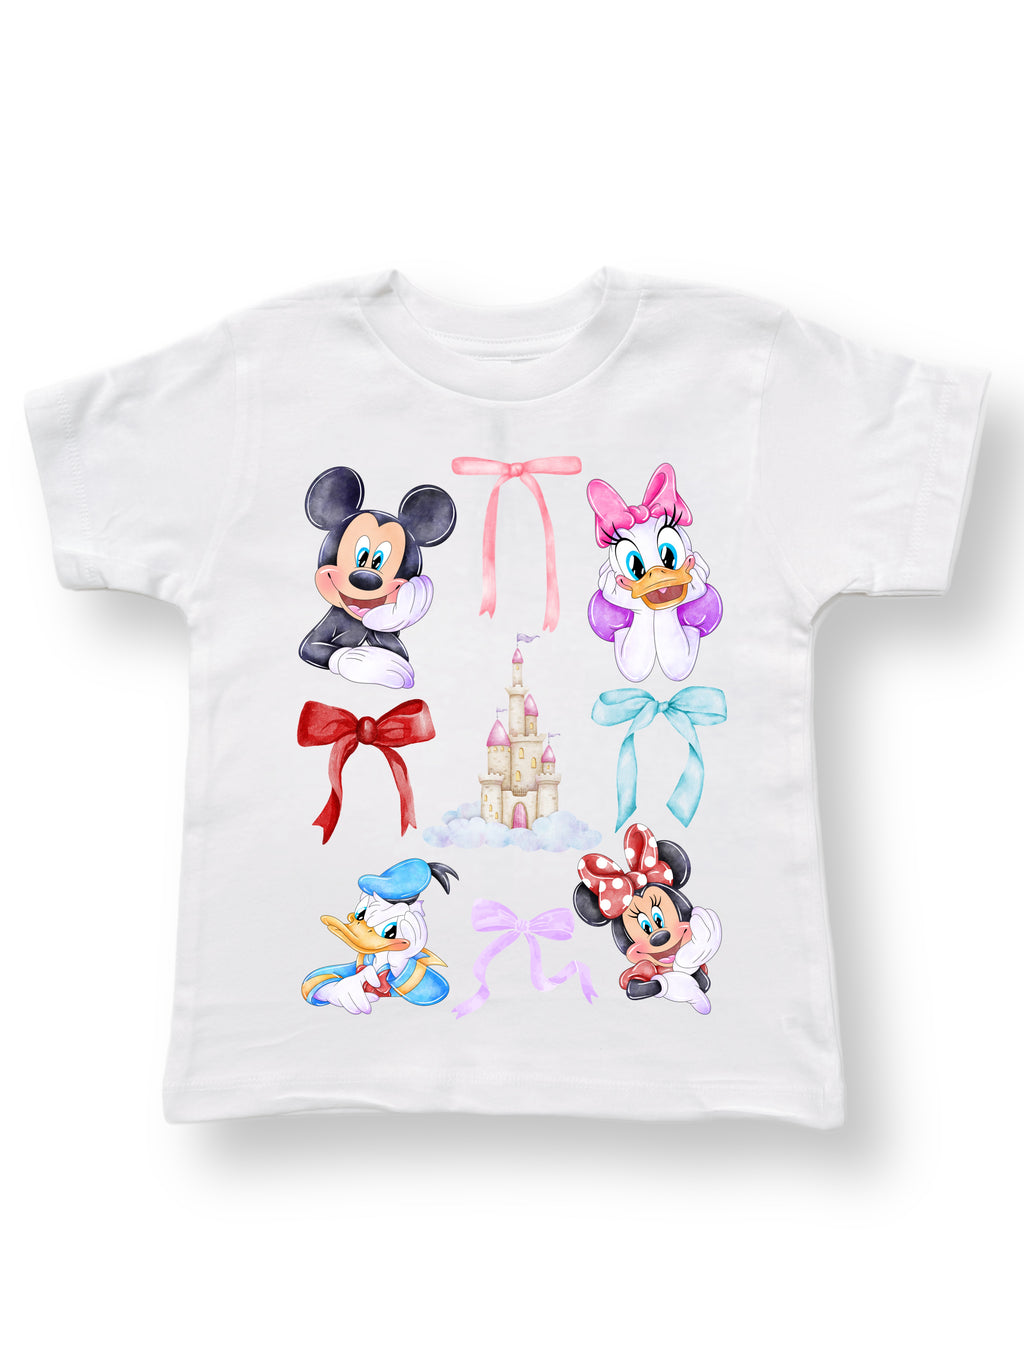 Favorite Things Tee- Mouse and Gang